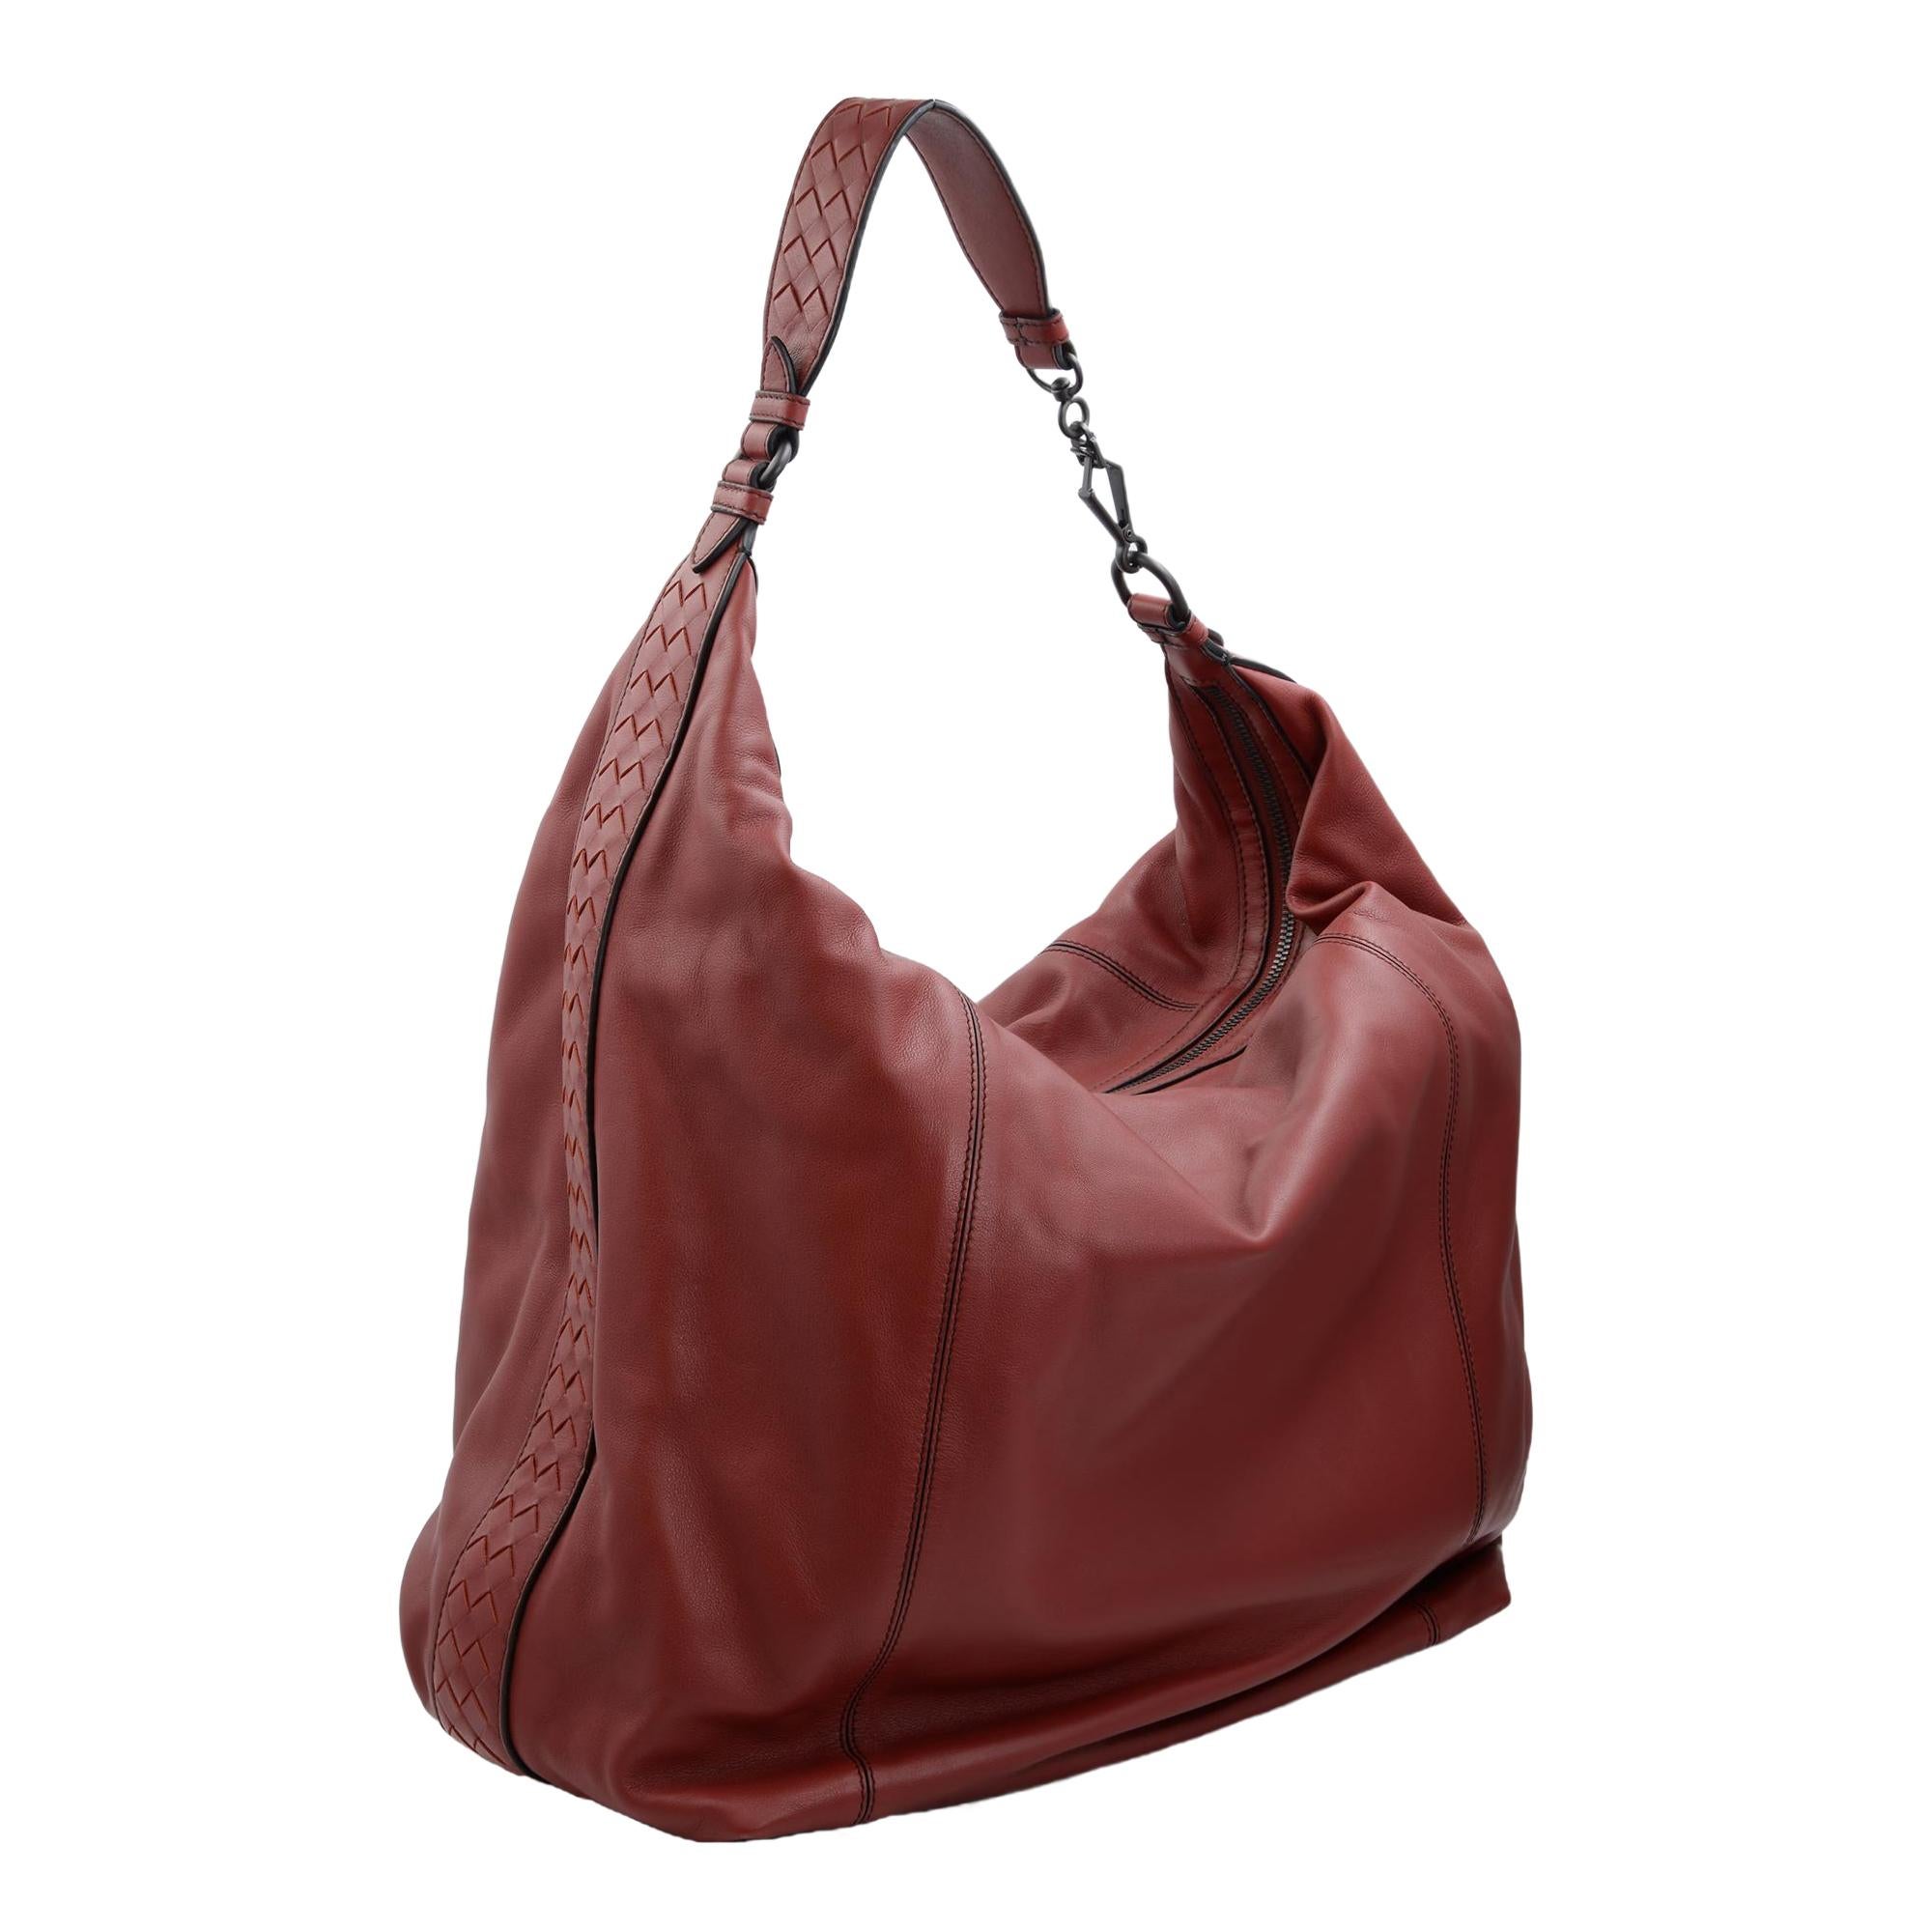 Bottega Veneta burgundy red hobo bag updated with signature Intrecciato detailing on the sides and shoulder strap. Features top zip closure, gunmetal tone hardware, one inside zip pocket, two inside slip pockets and suede lining. Made in Italy.